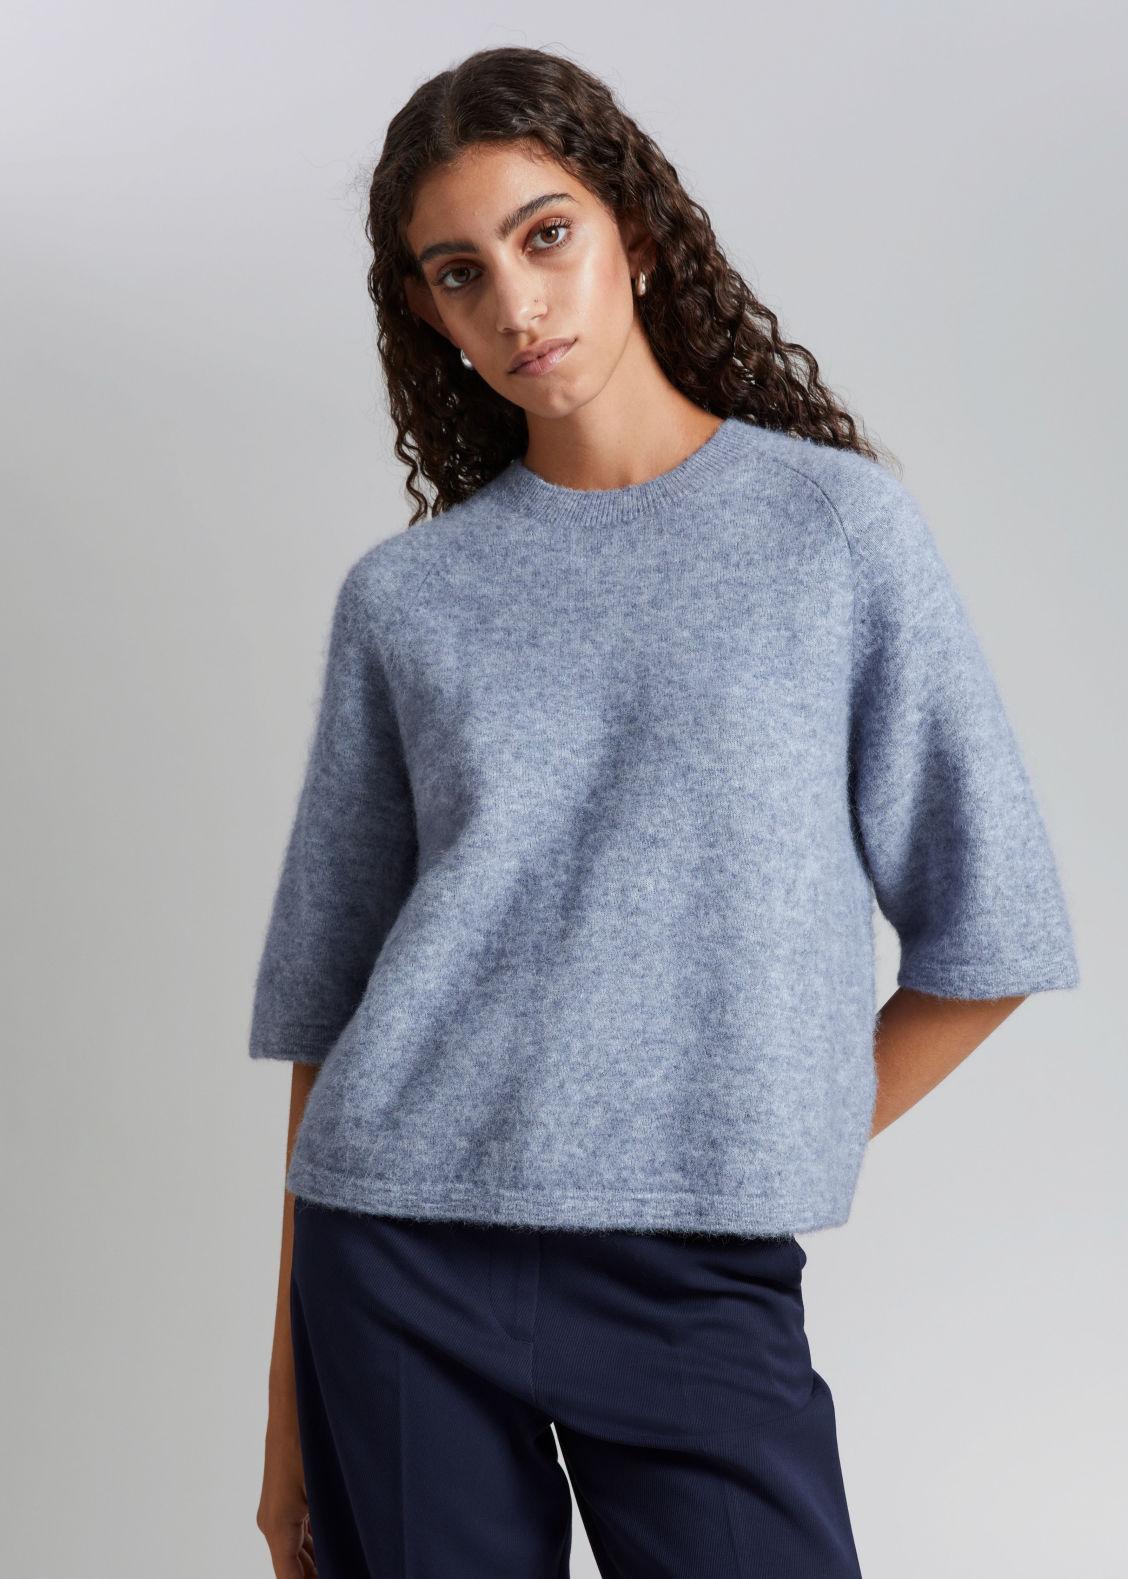 & Other Stories Boxy Alpaca Knit T-shirt in Gray | Lyst